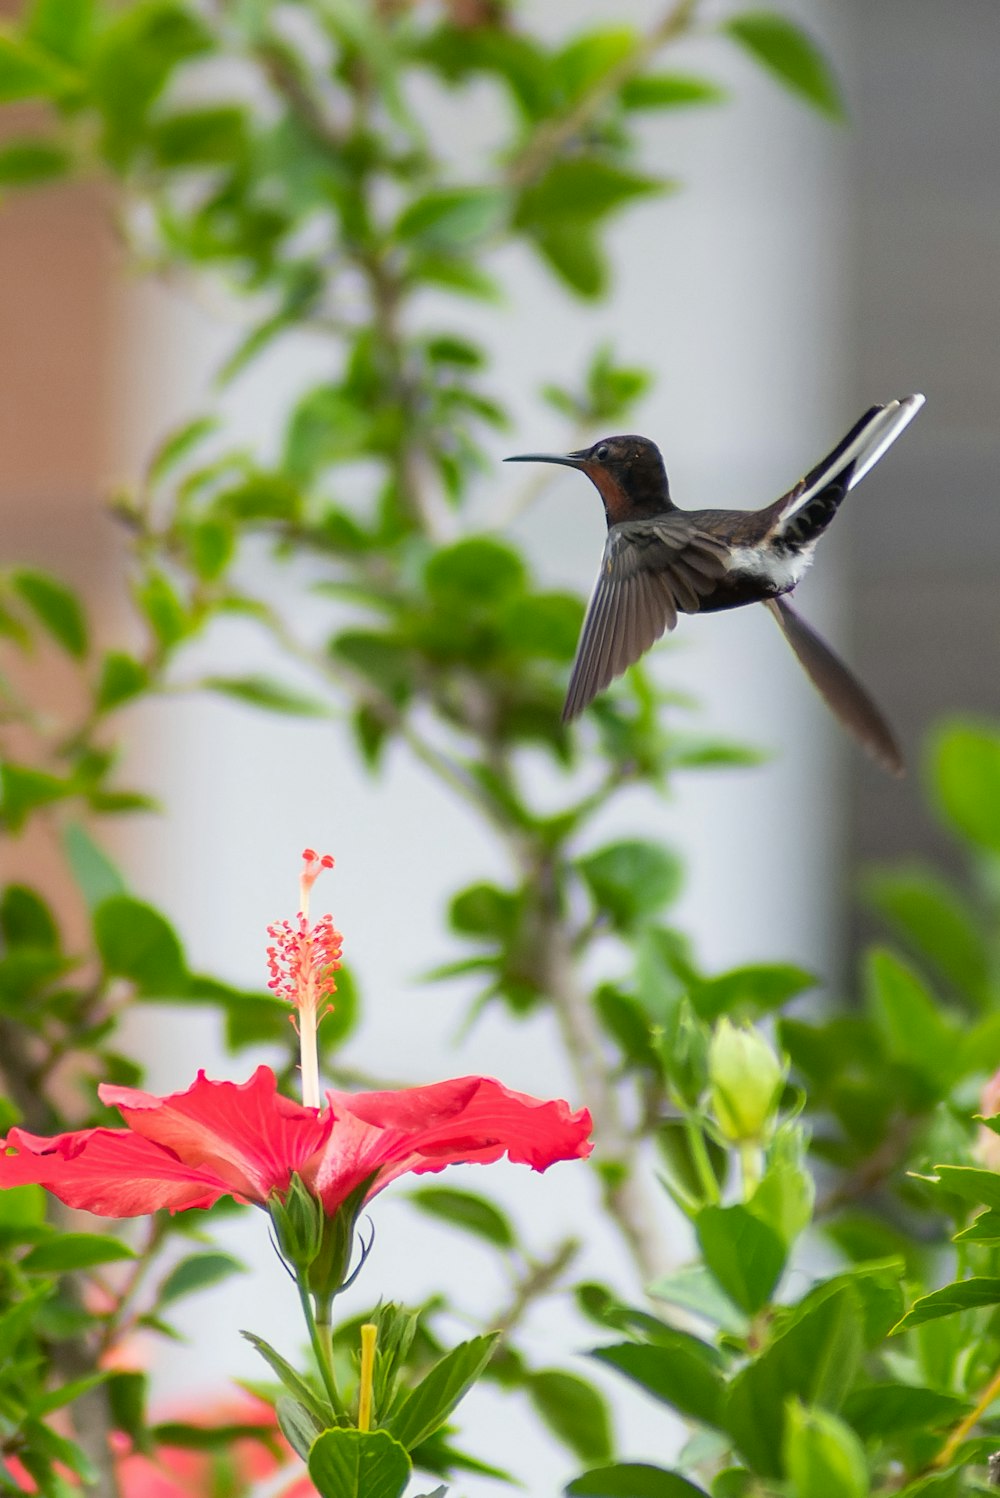 a hummingbird flying over a red flower